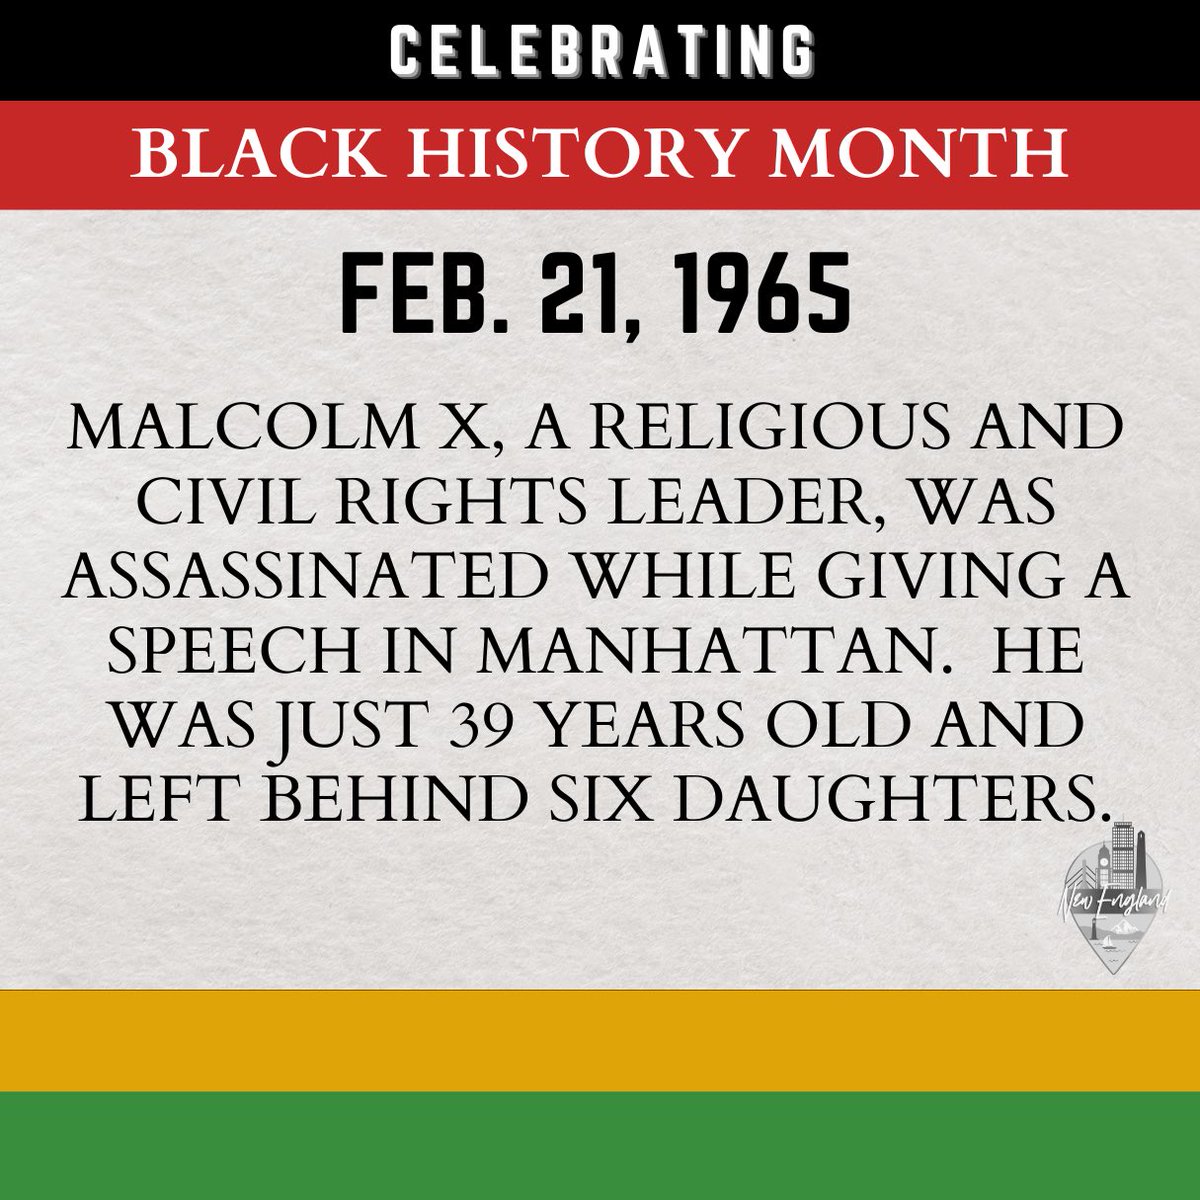 Today we recognize a somber event in Black History.